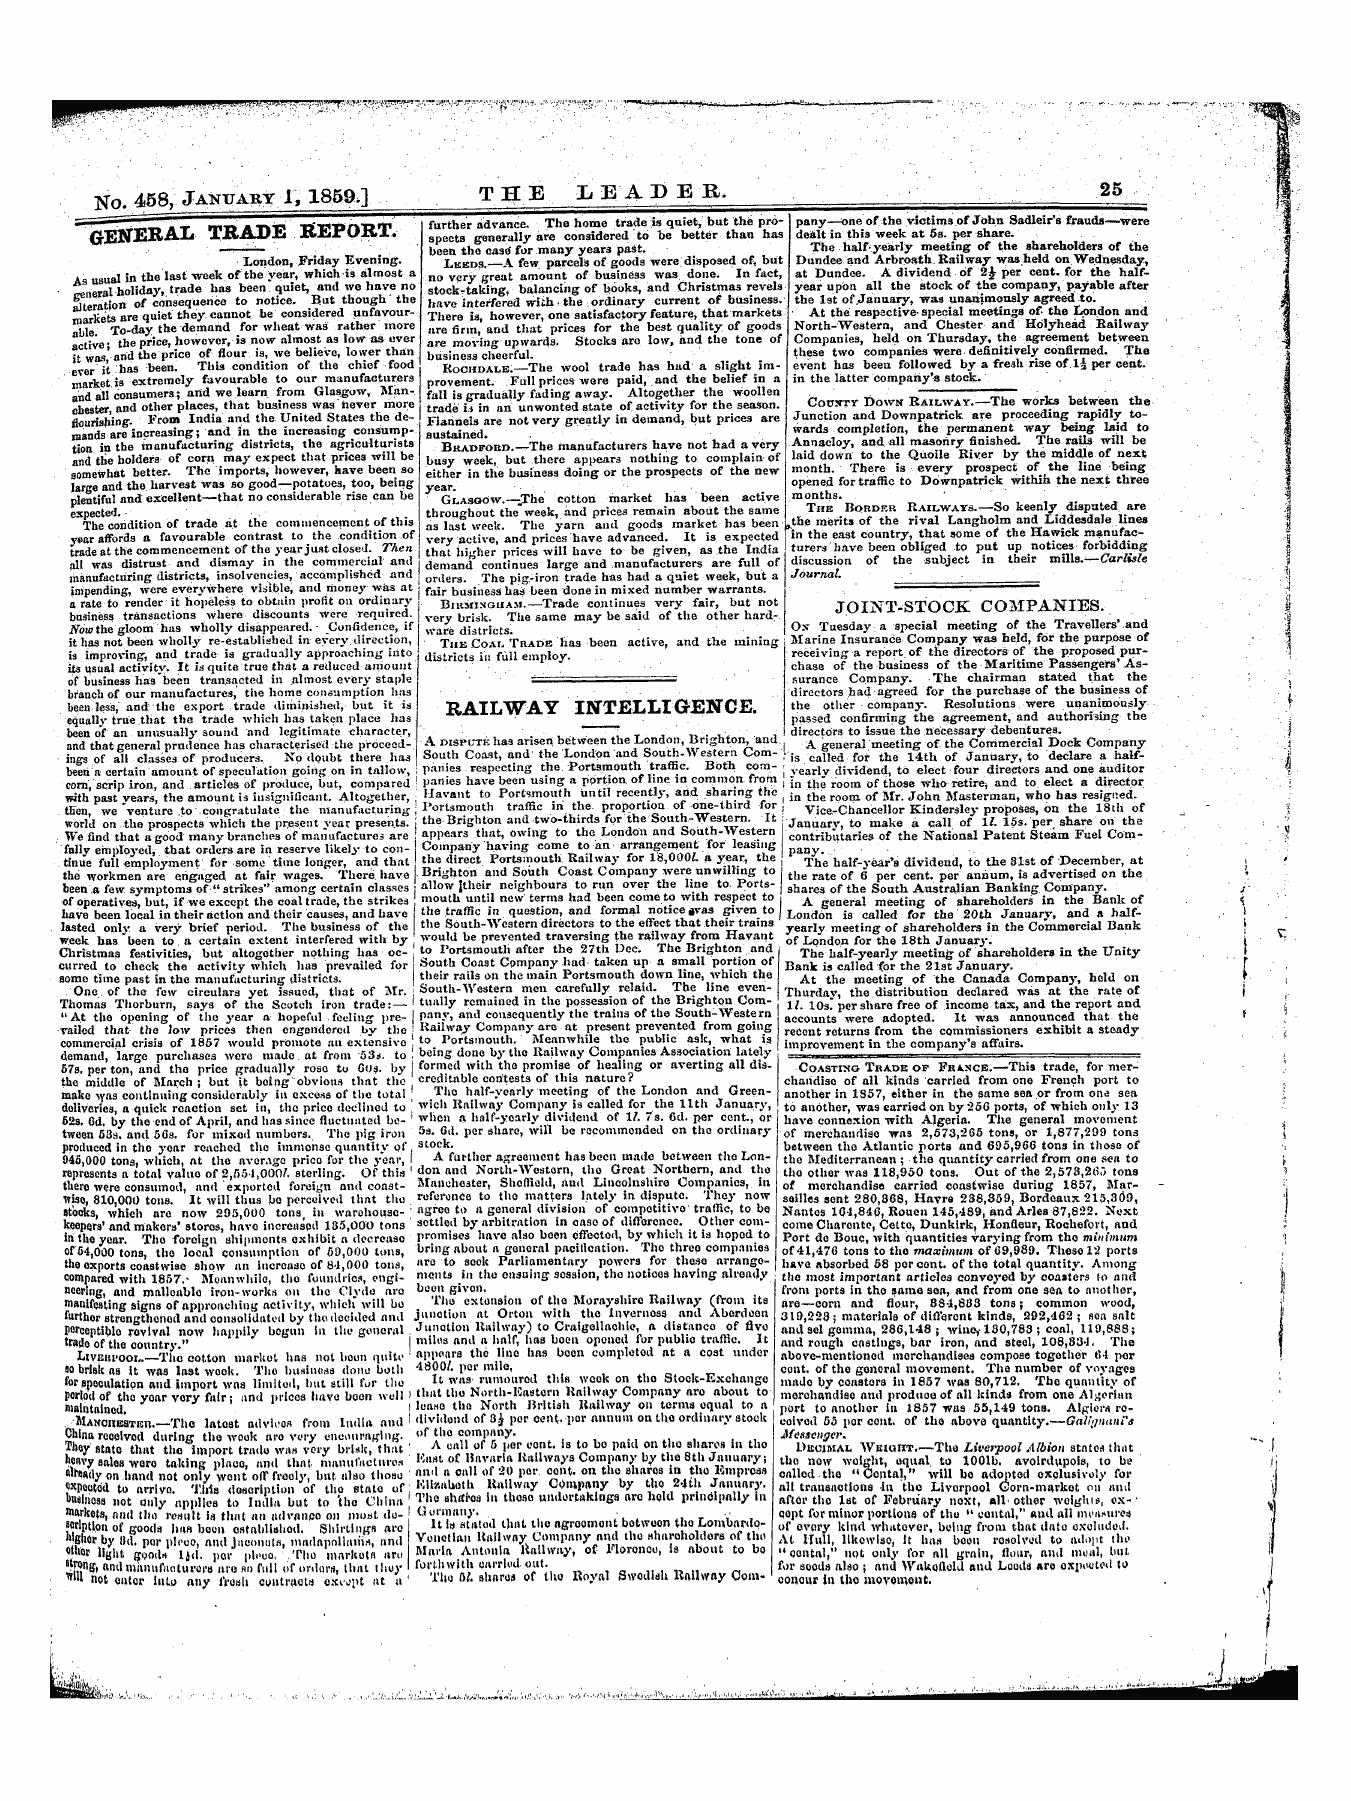 Leader (1850-1860): jS F Y, 1st edition: 25